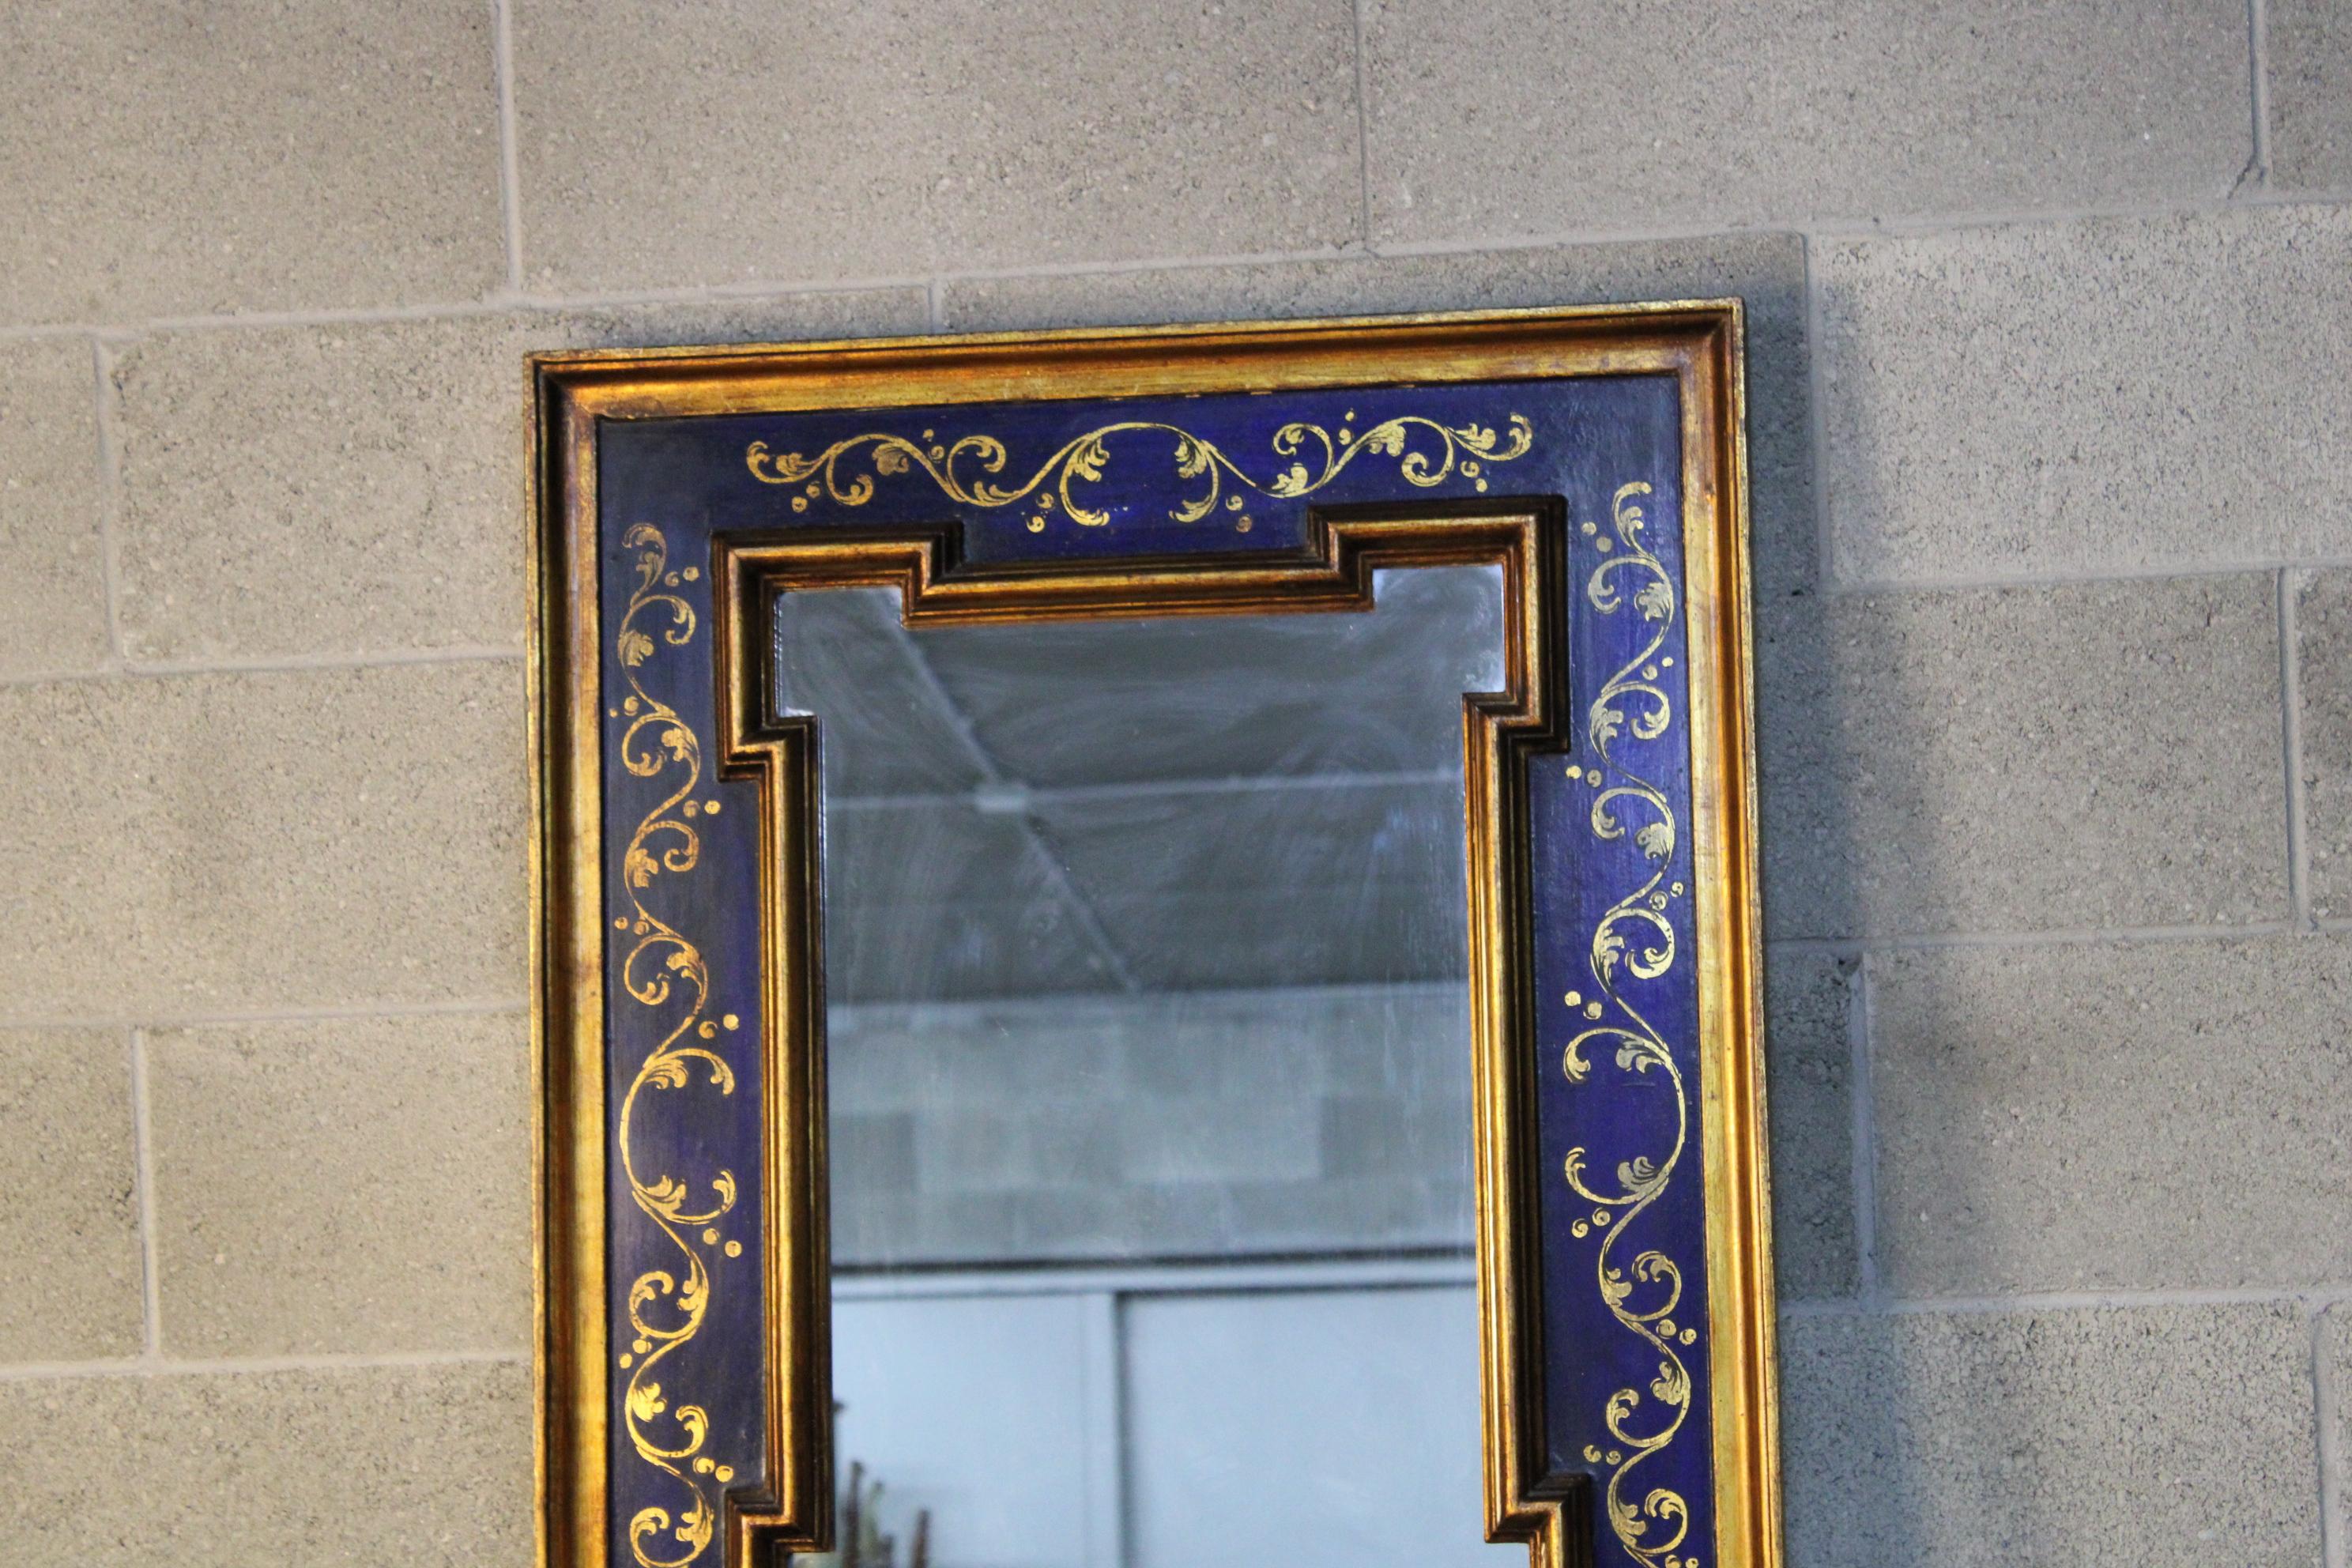 An Italian golden wall mirror 
painted with golden- oro zecchino in the 19th century
frame belongs to 19th century and the mirror is recently attached in the early 1900s
Beautiful piece 70 x 90 cm 
will be shipped inside a wood protected